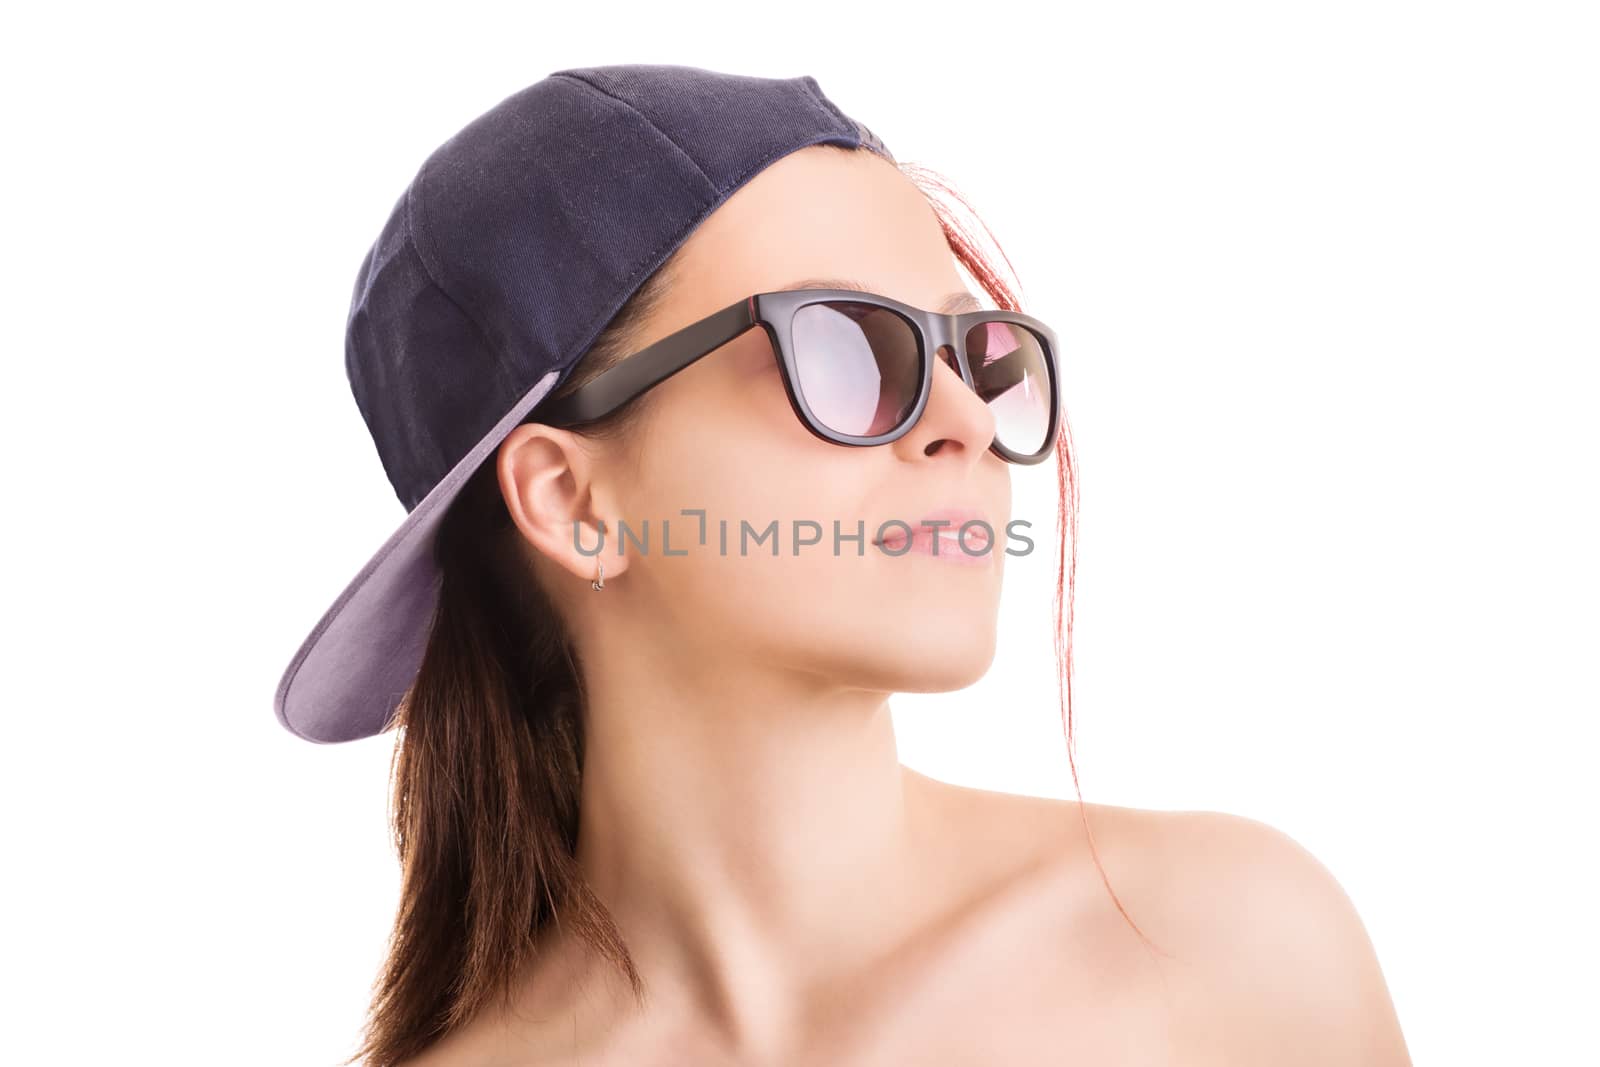 Portrait of a girl wearing hat and sunglasses by Mendelex